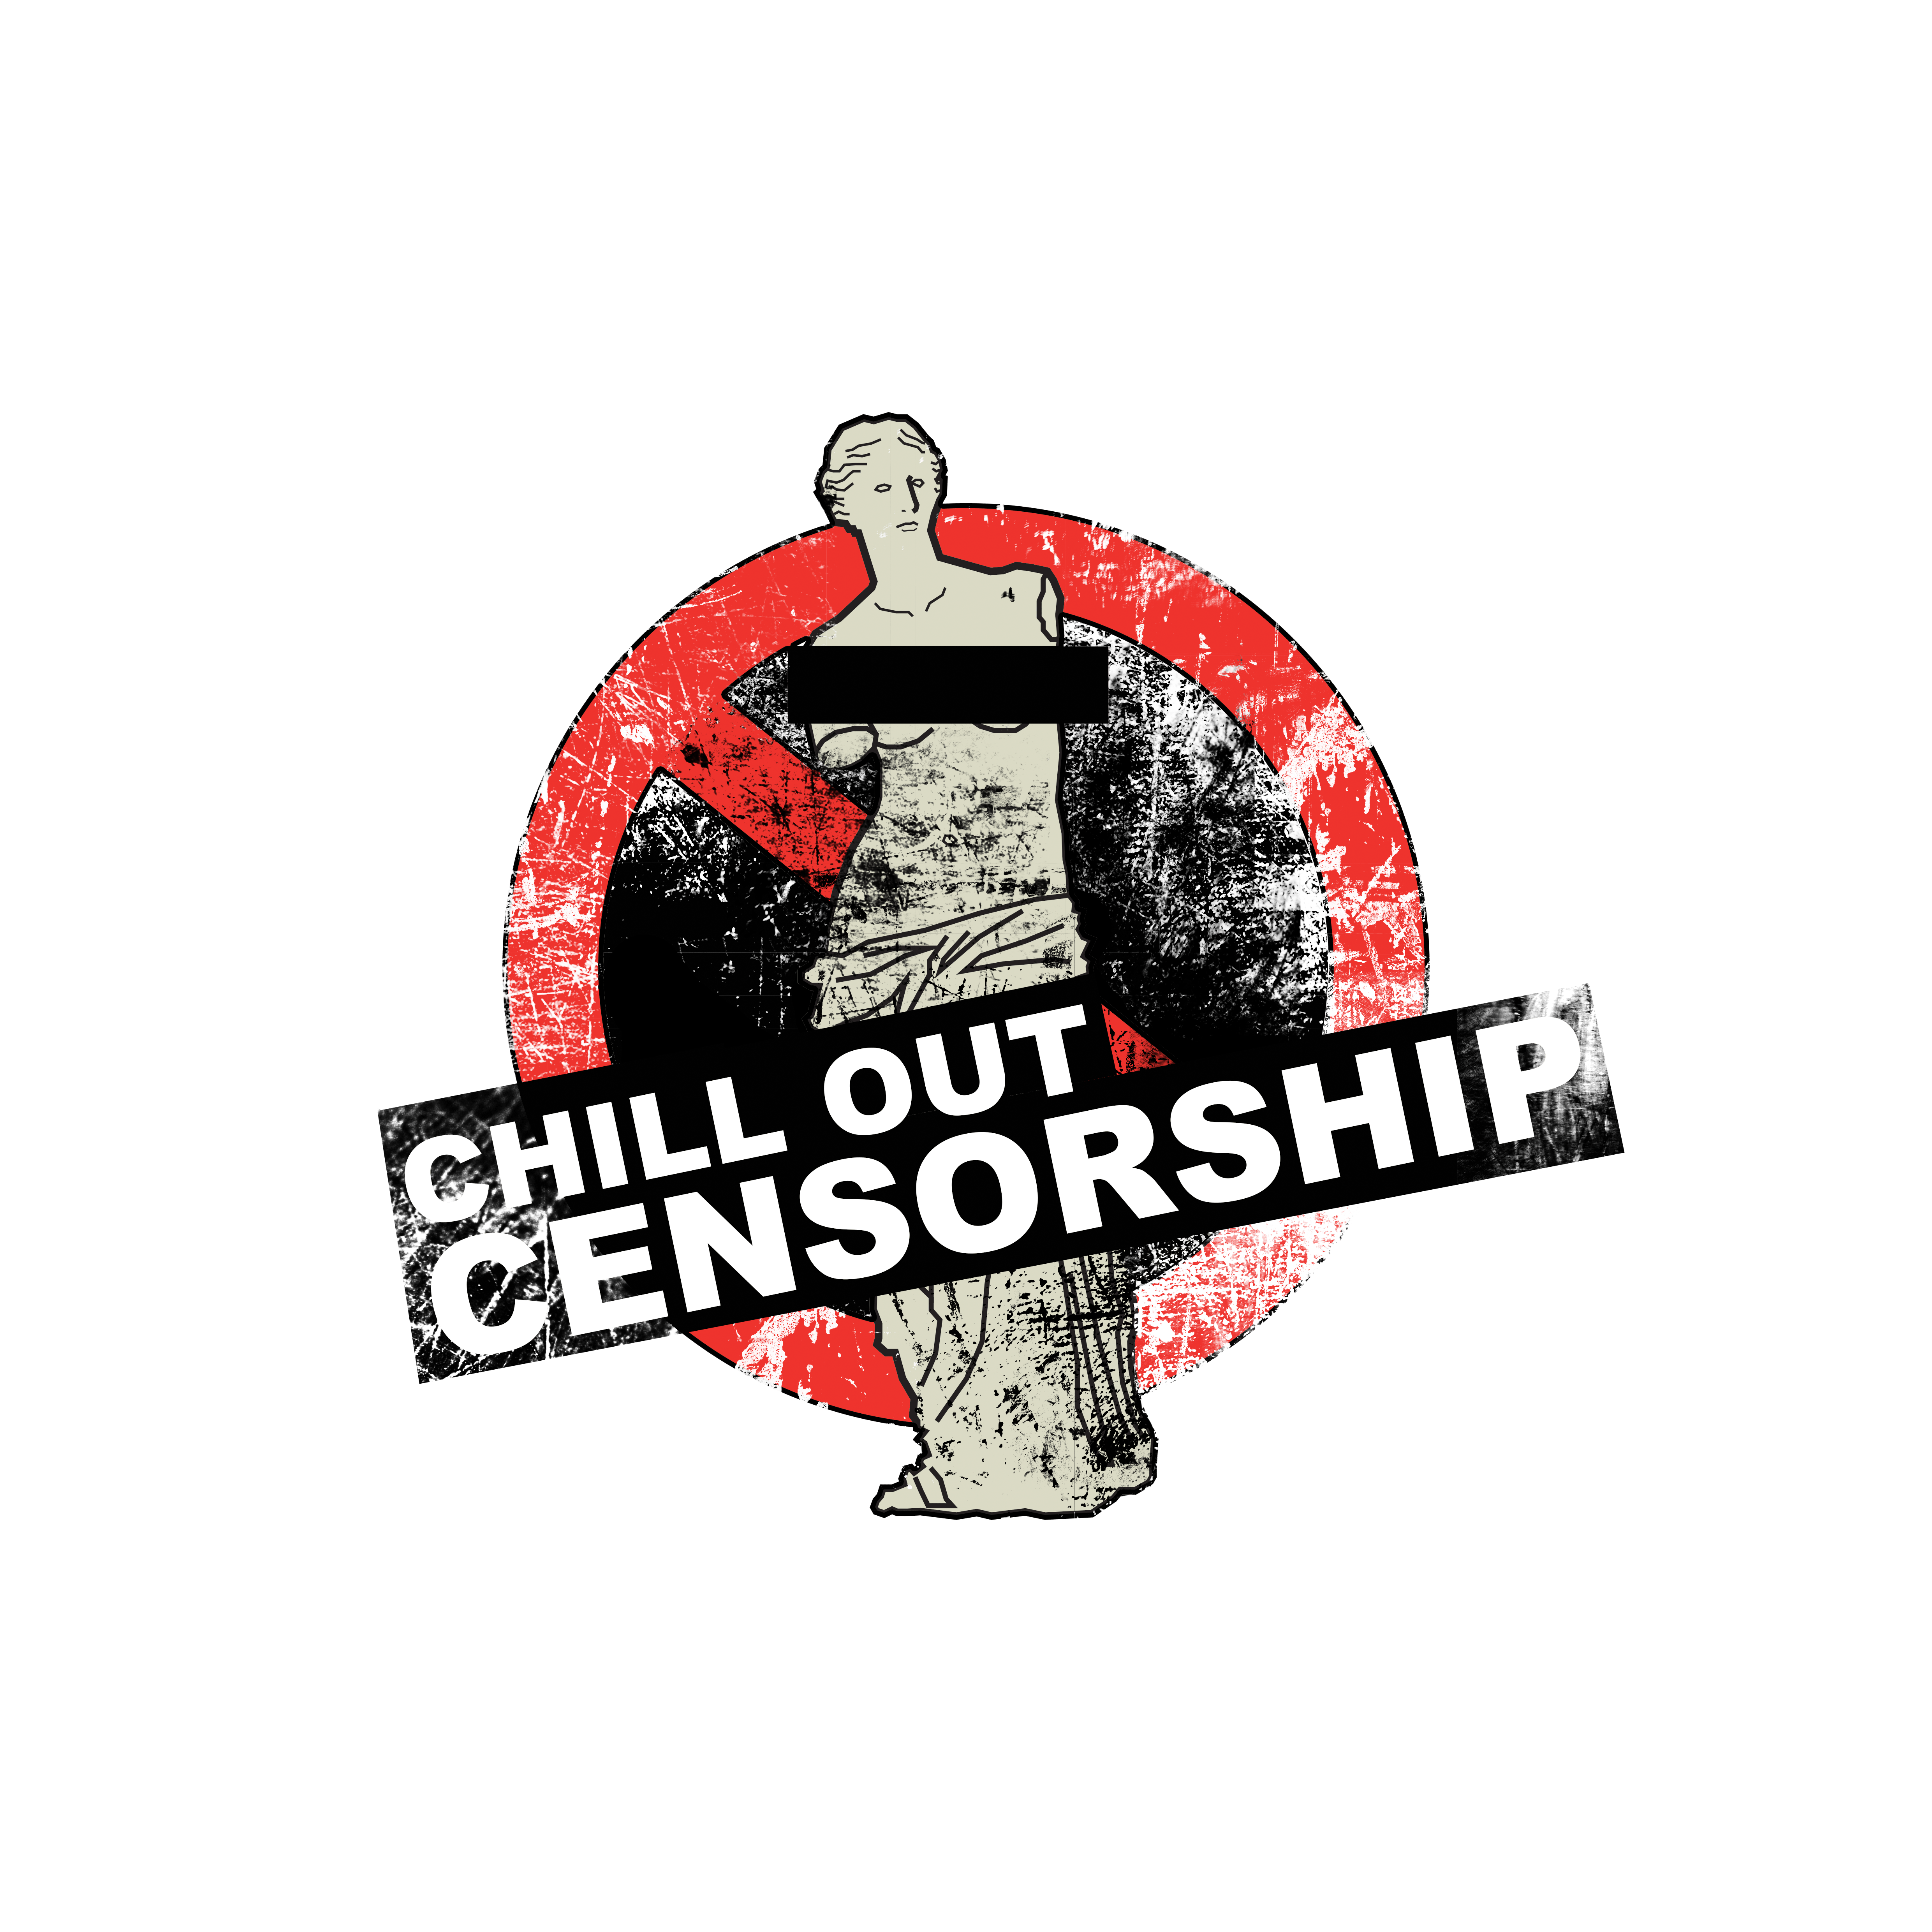 Chill Out Logo - Chill Out Censorship Logo – chilloutcensorship